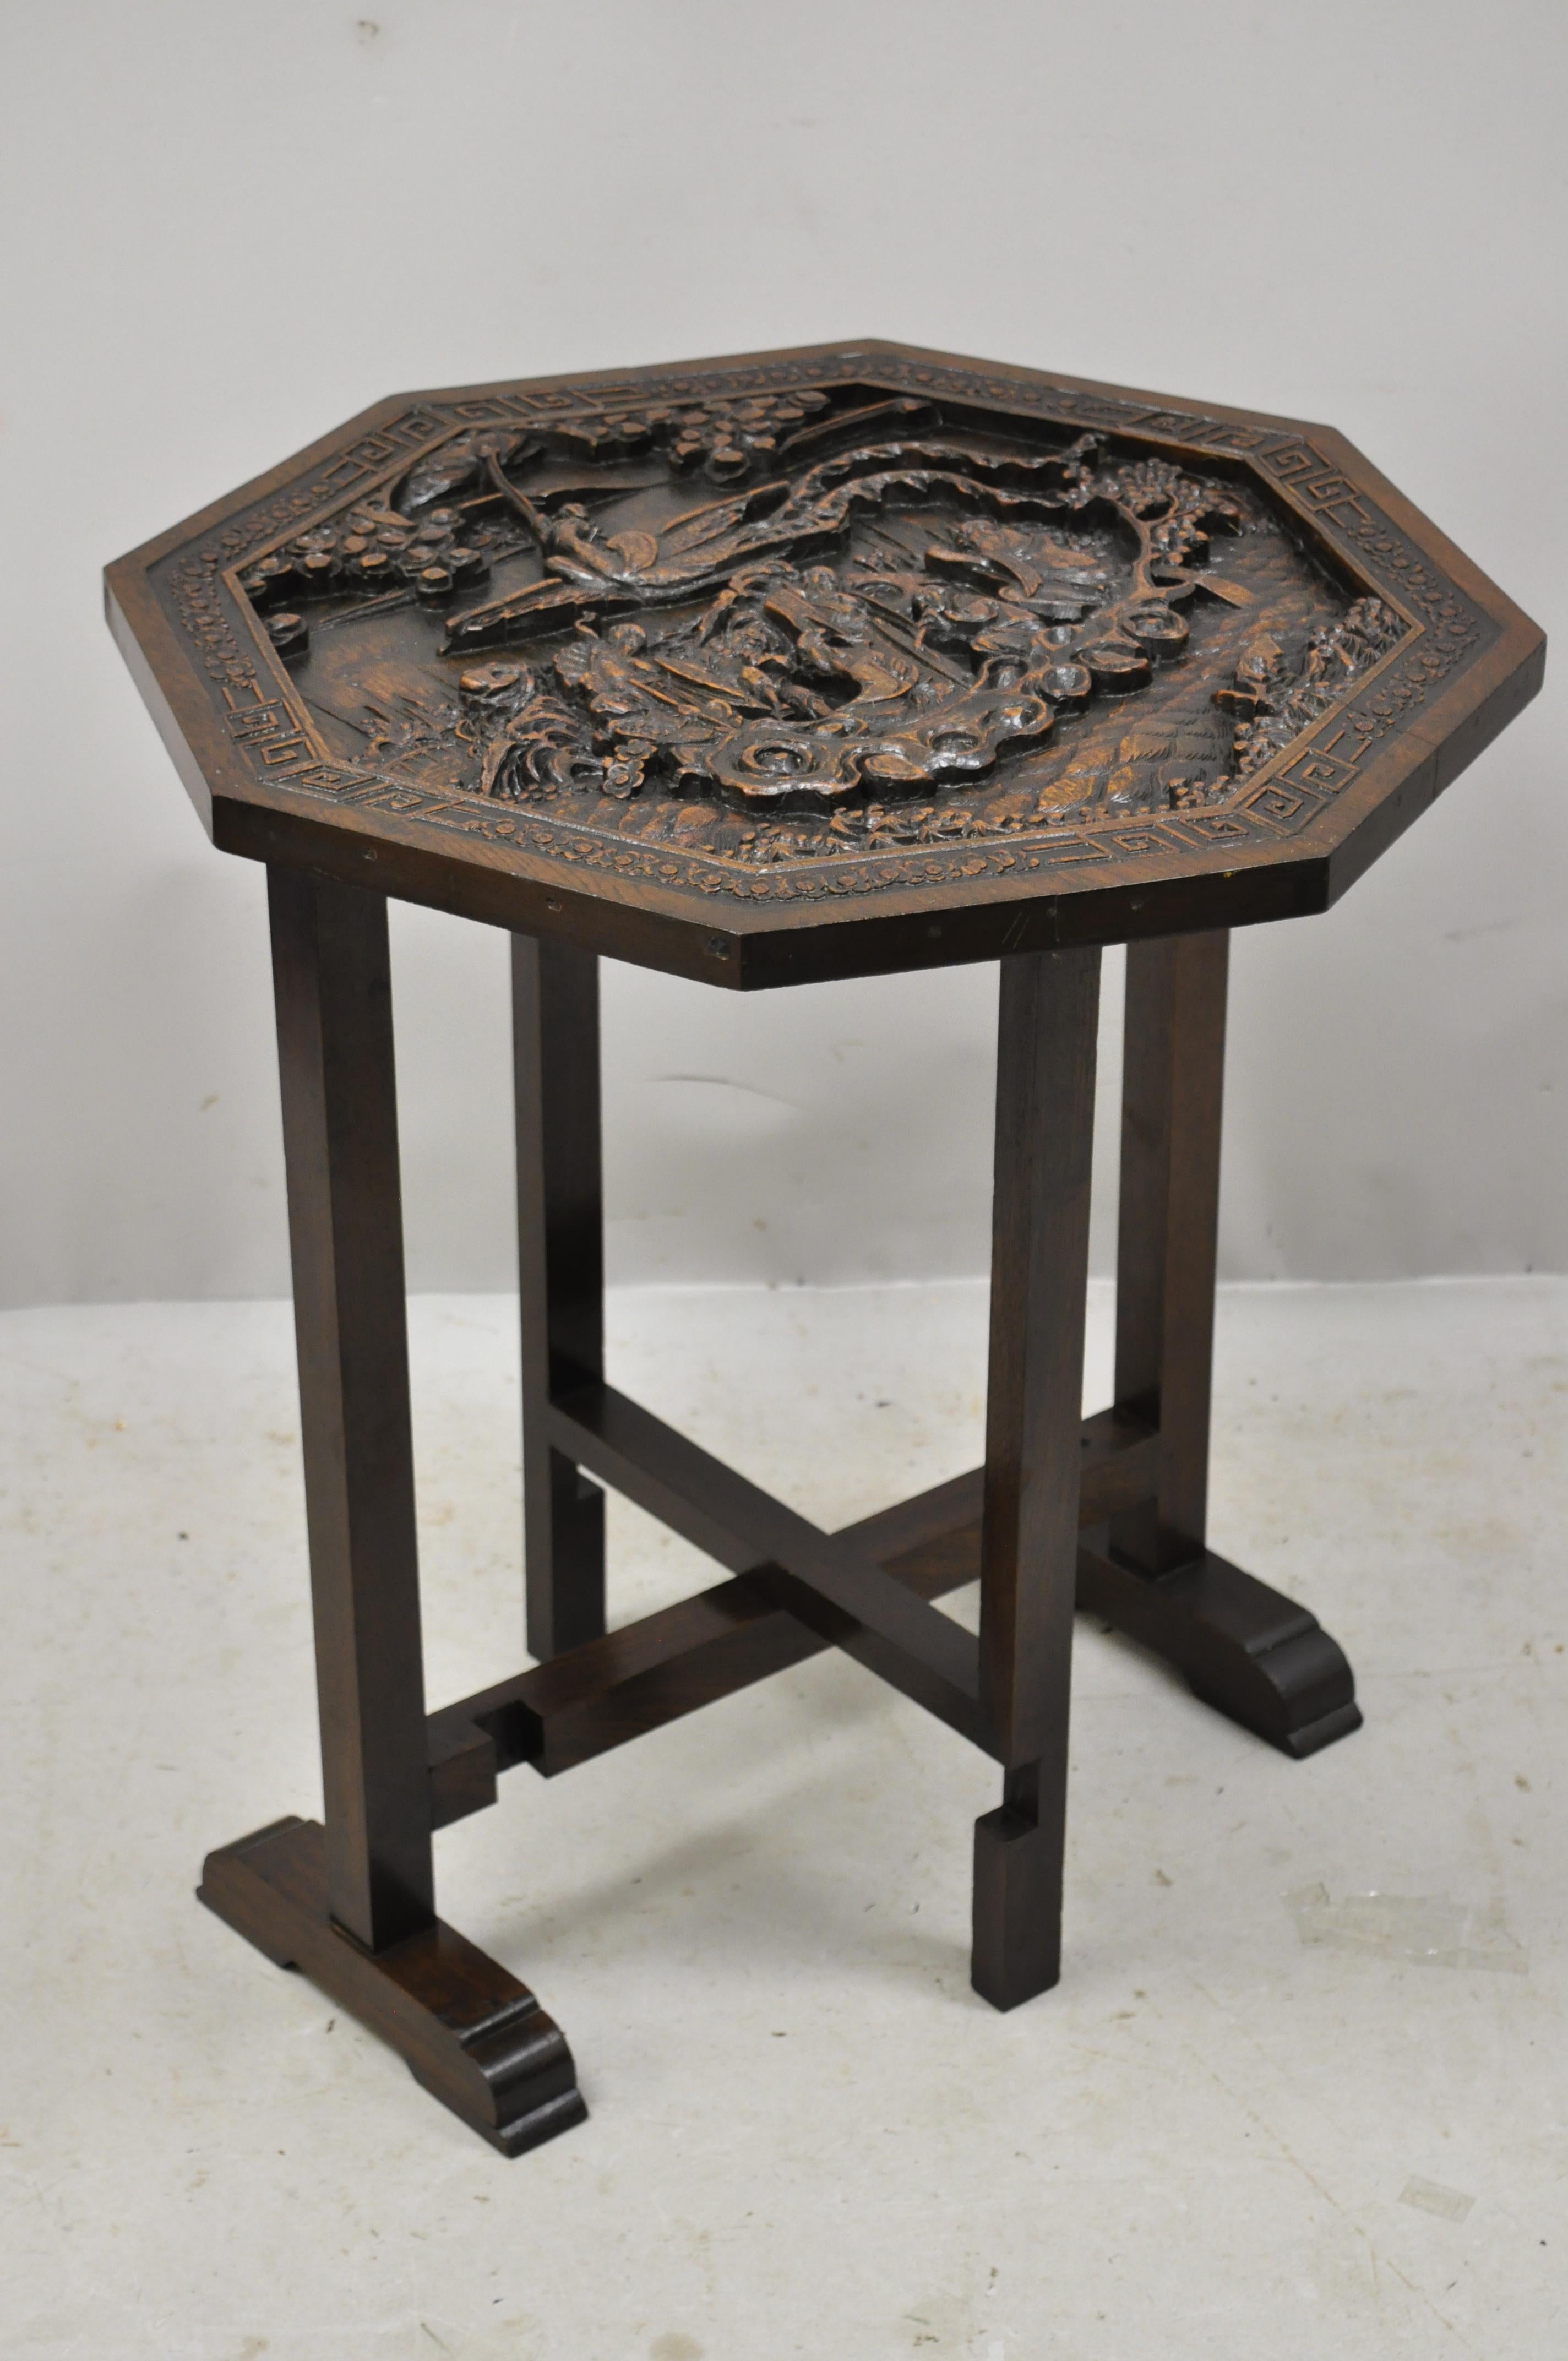 20th Century Antique Chinese Carved Hardwood Folding Gate Leg Table with Figural Carvings For Sale